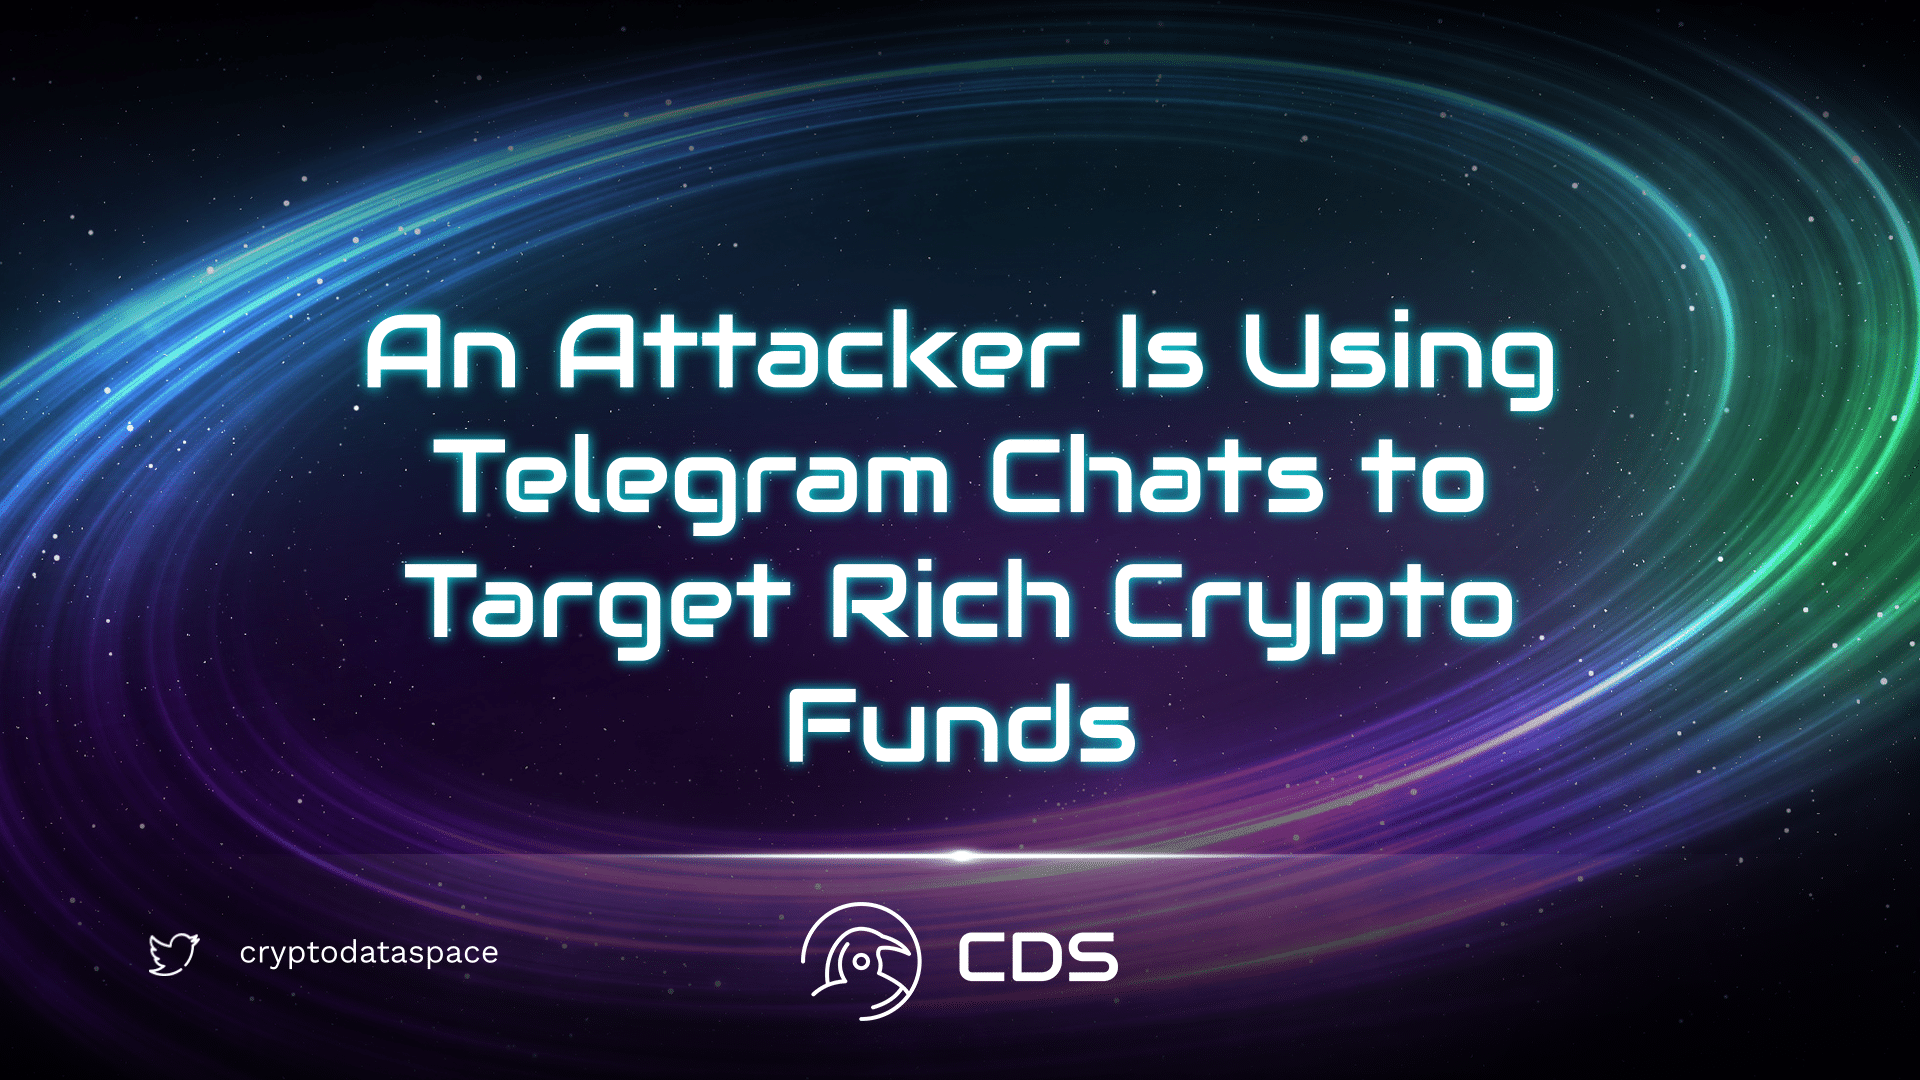 An Attacker Is Using Telegram Chats to Target Rich Crypto Funds